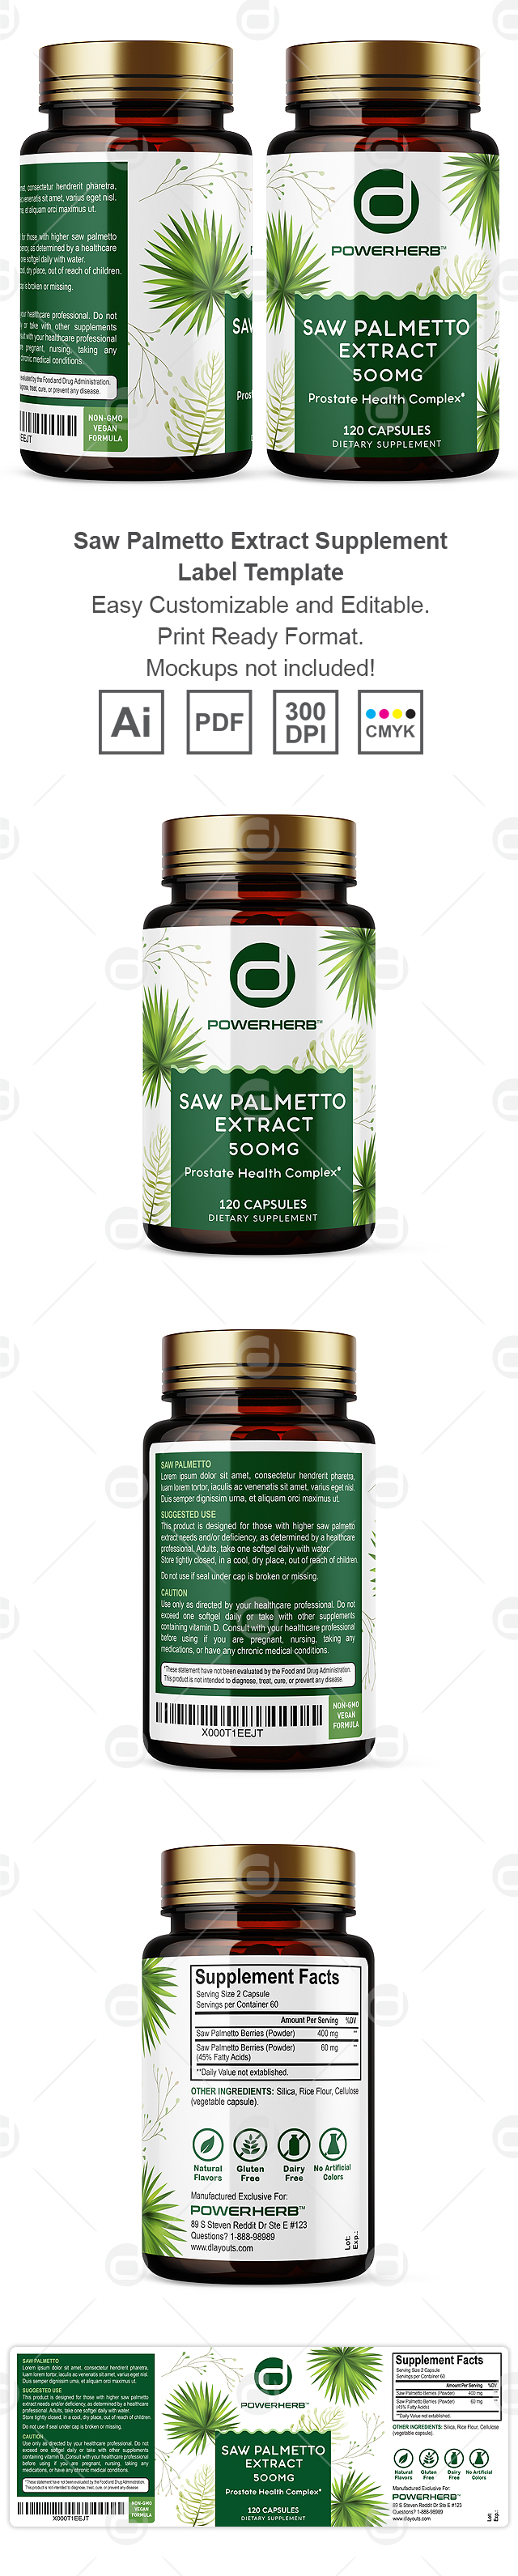 Saw Palmetto Extract Supplement Label Template